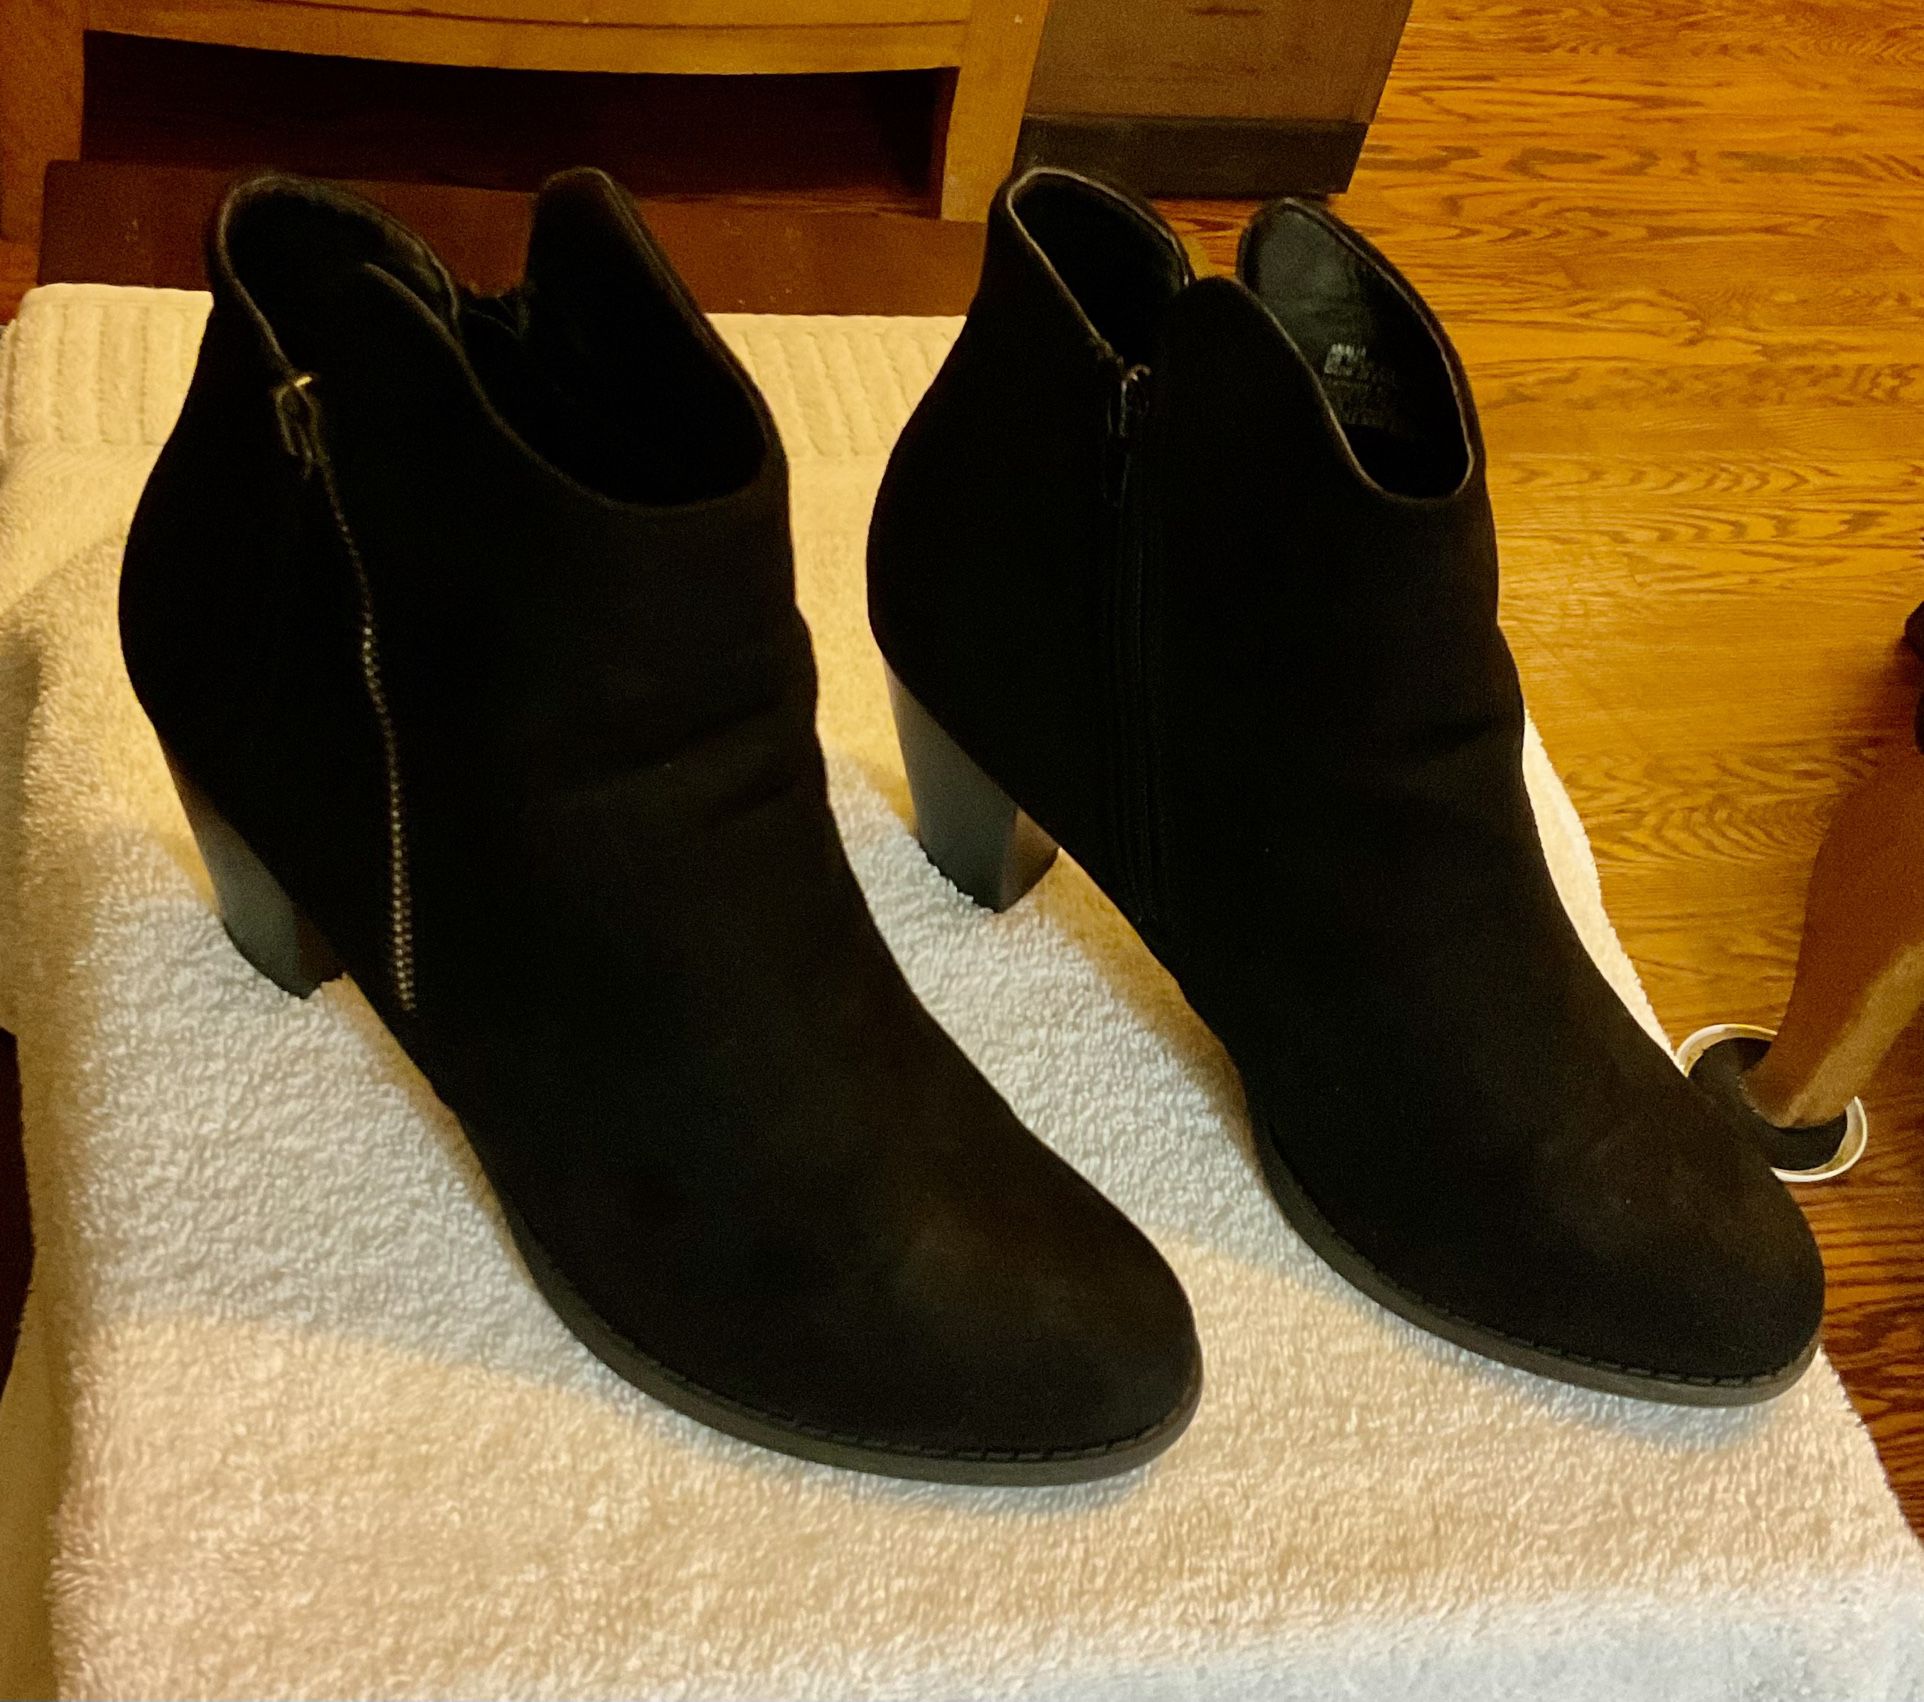 JUSTFAB BLACK & BROWN Western Style Loana Faux Suede Stacked Heel BootS. Sz-10